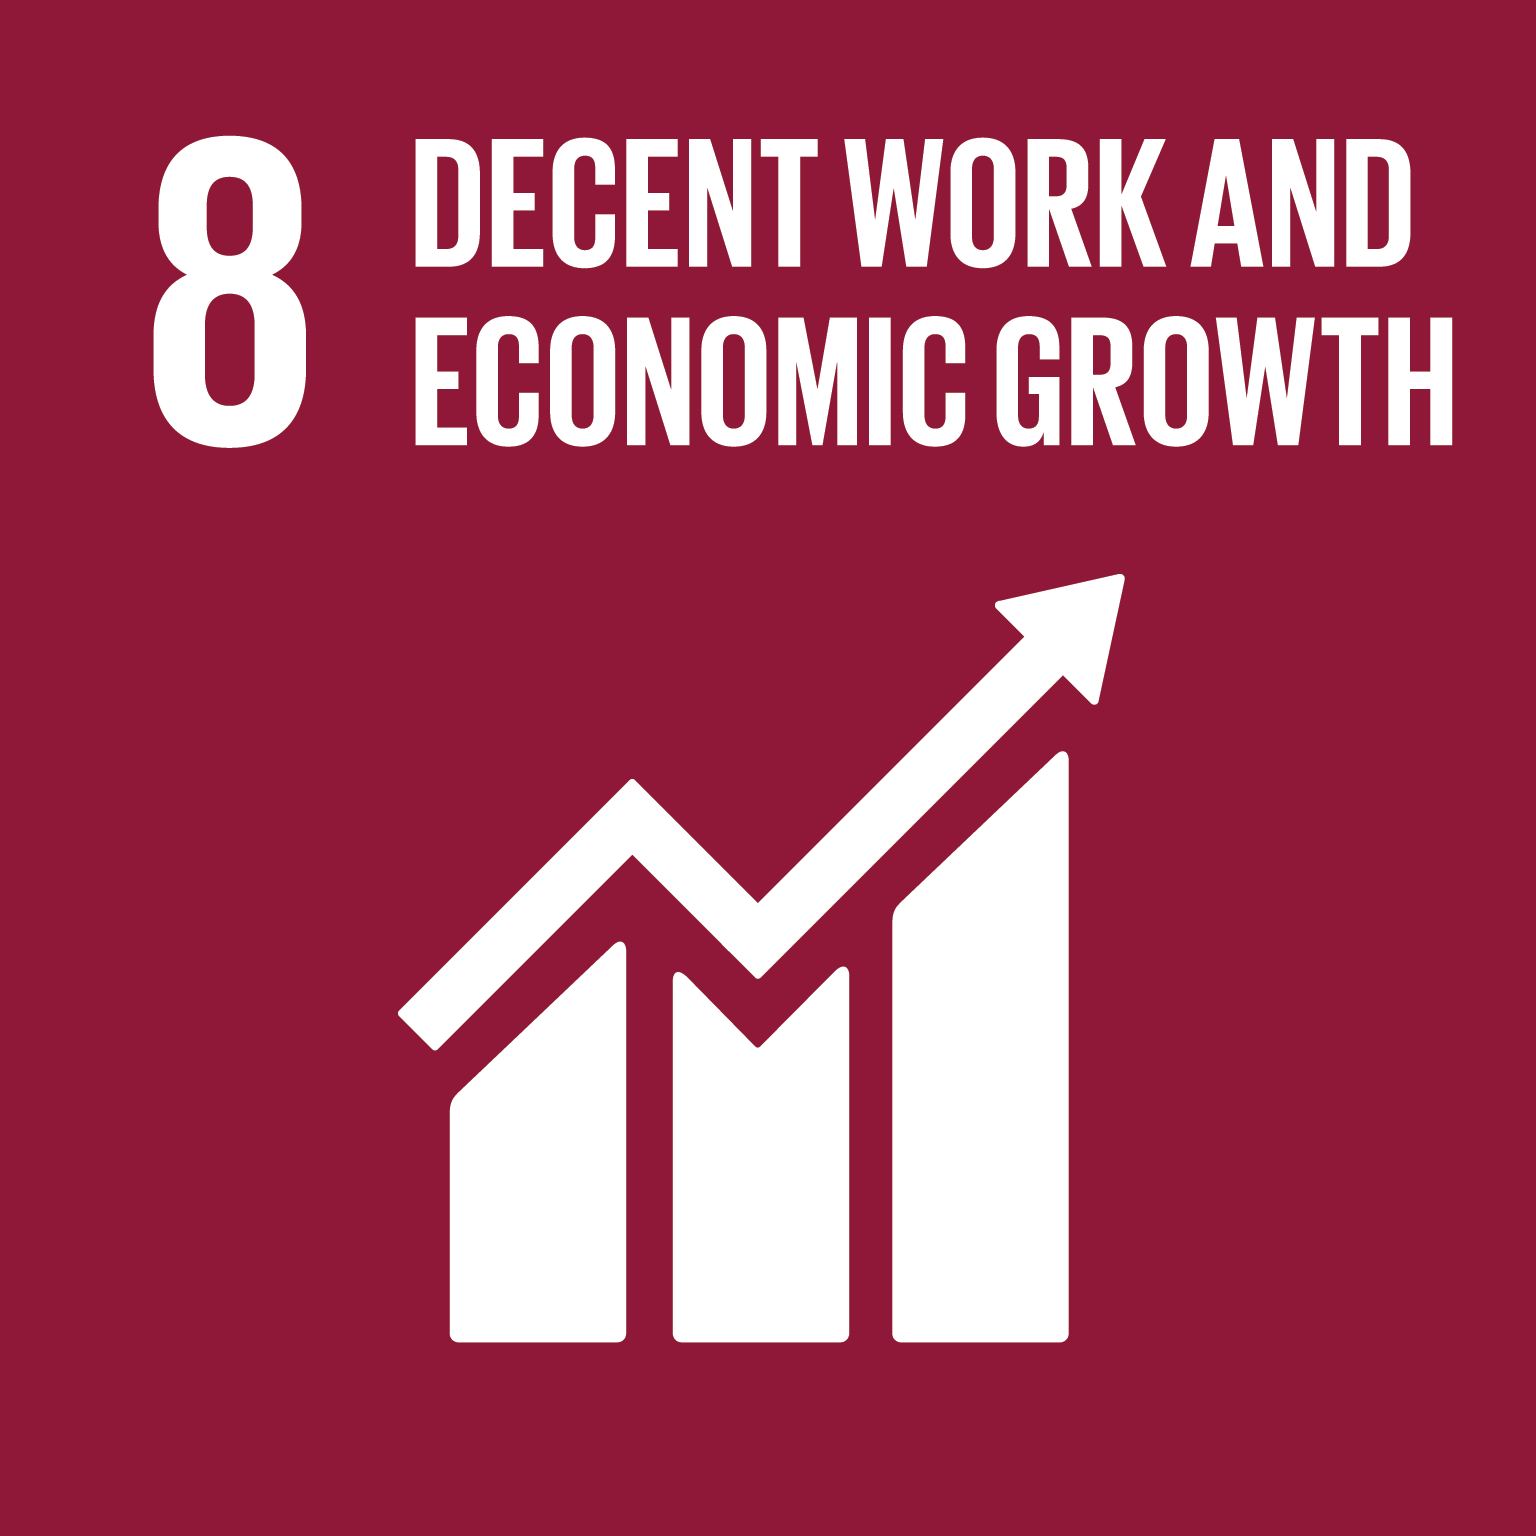 sustainable development goal 8 icon decent work and economic growth